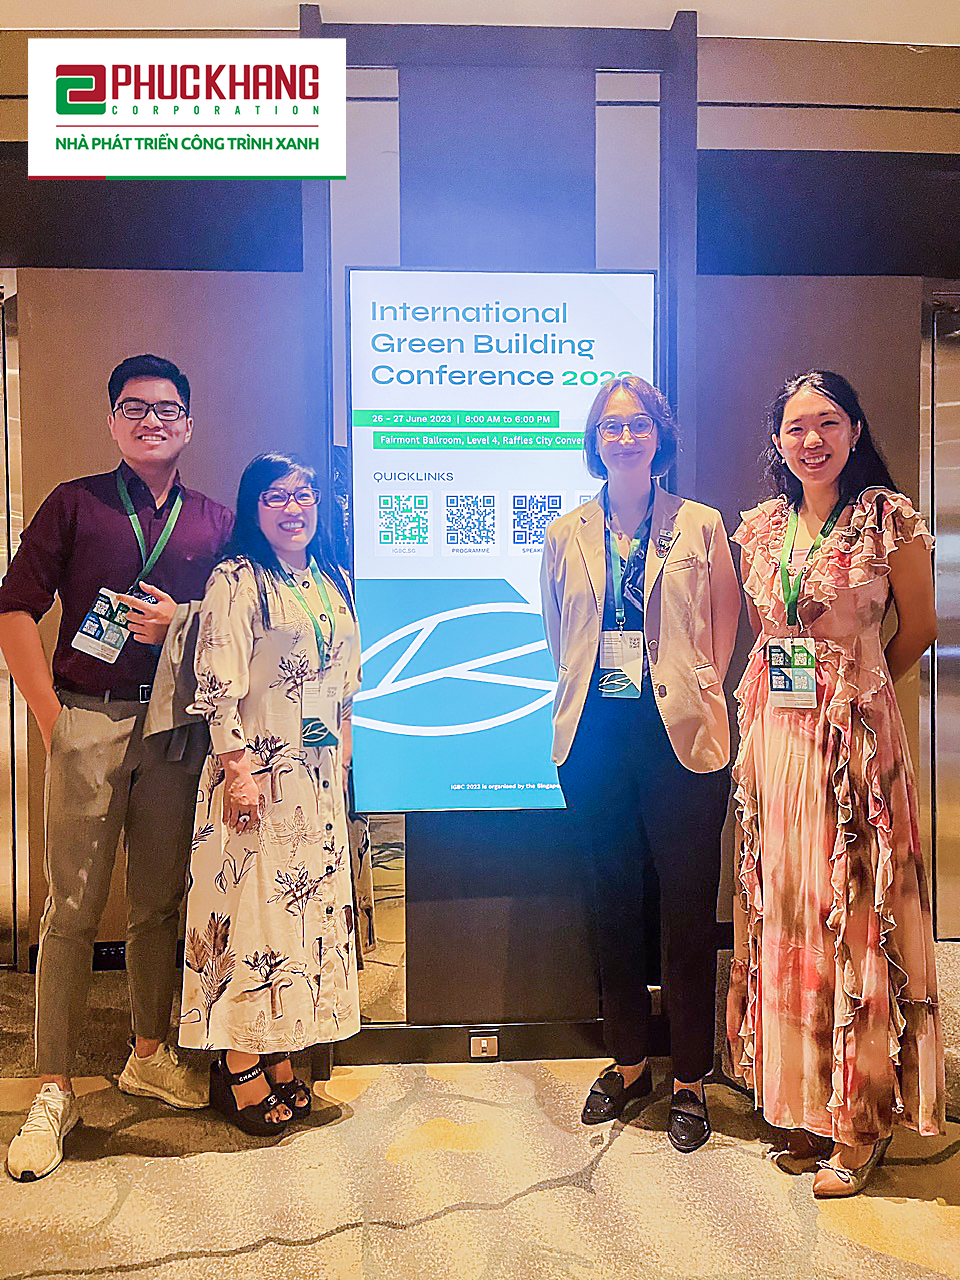 CEO Luu Thi Thanh Mau (L, 2nd), WGBC CEO Cristina Gamboa (R, 2nd), and Program Head for WGBC’s Asia Pacific Region Joy Gai (R, 1st) pose for a group photo.